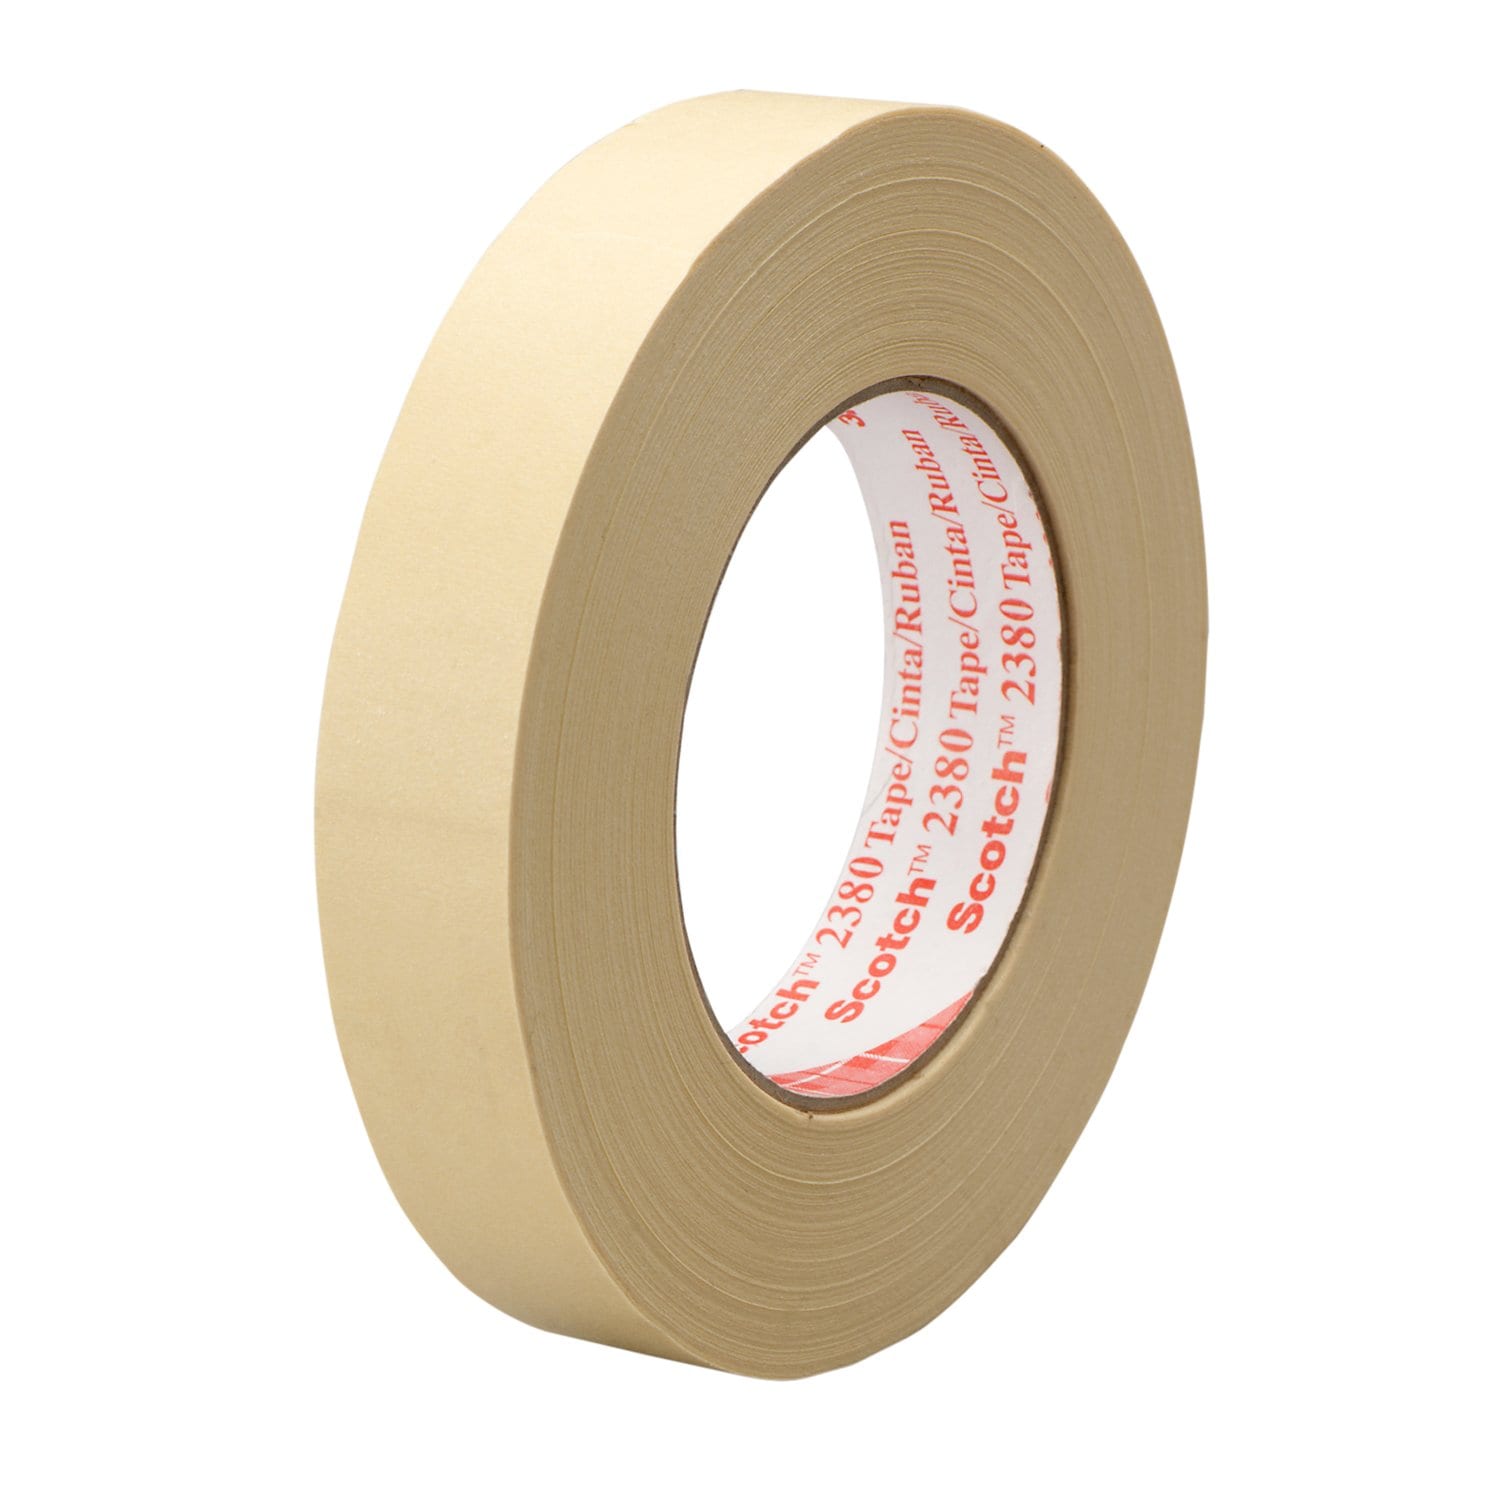 7010312641 - 3M Performance Masking Tape 2380, Tan, 24 in x 60 yd, 7.2 mil, 1
Roll/Case